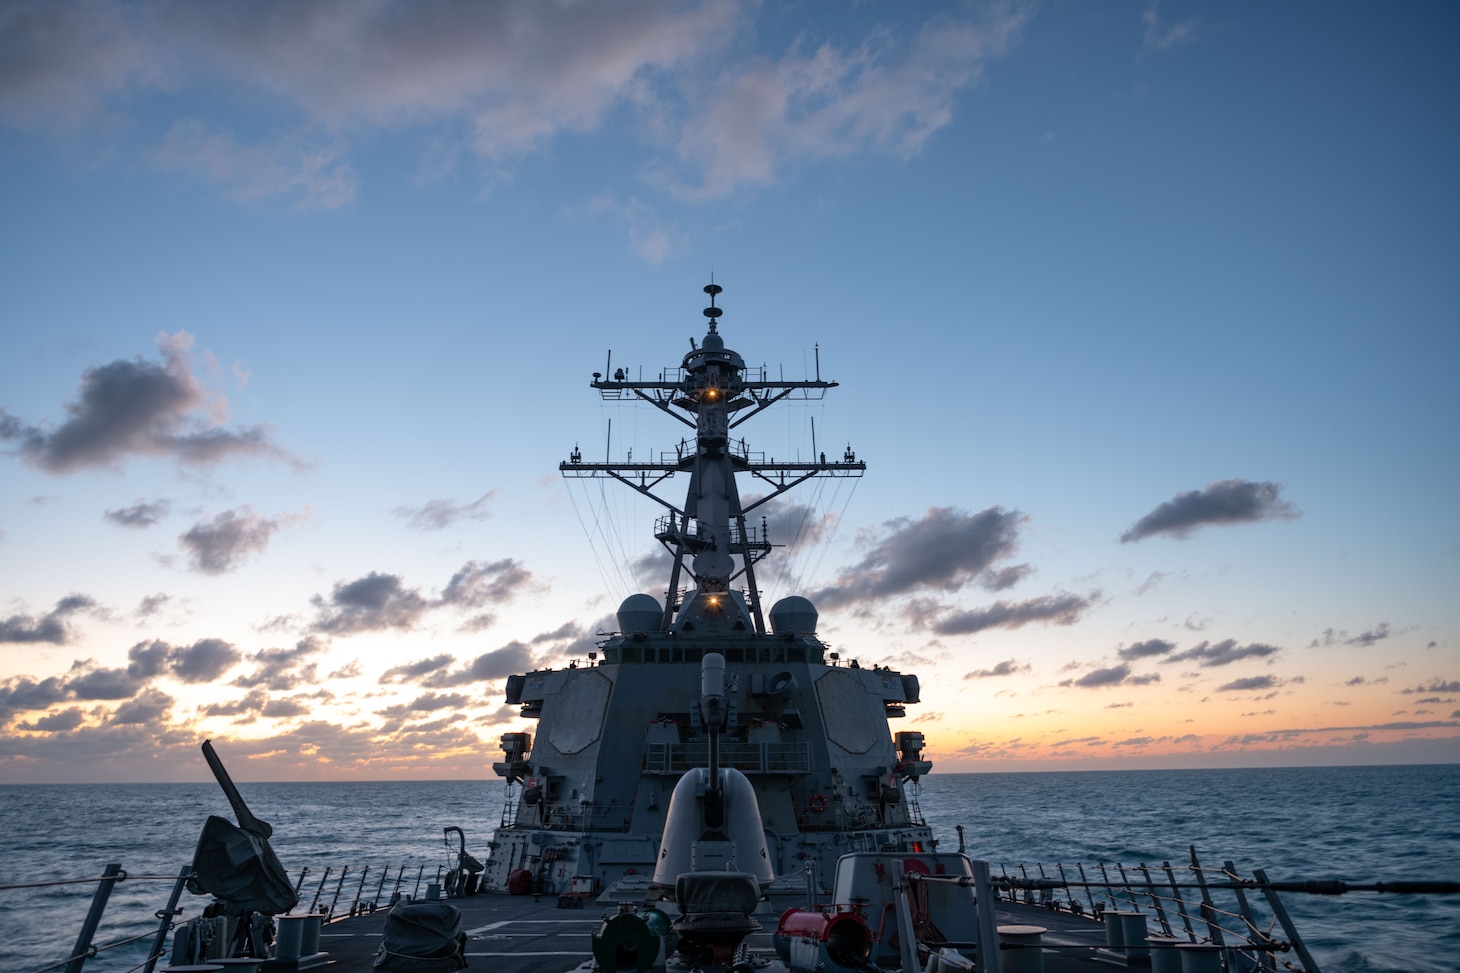 TAIWAN STRAIT (Nov. 20, 2020) – The Arleigh Burke-class guided-missile destroyer USS Barry (DDG 52) conducts routine underway operations in the Taiwan Strait. Barry is assigned to Destroyer Squadron (DESRON) 15, the Navy’s largest forward-deployed DESRON and the U.S. 7th Fleet's principal surface force, forward-deployed to the U.S. 7th Fleet area of operations in support of a free and open Indo-Pacific. (U.S. Navy photo by Lieutenant Junior Grade Samuel Hardgrove)